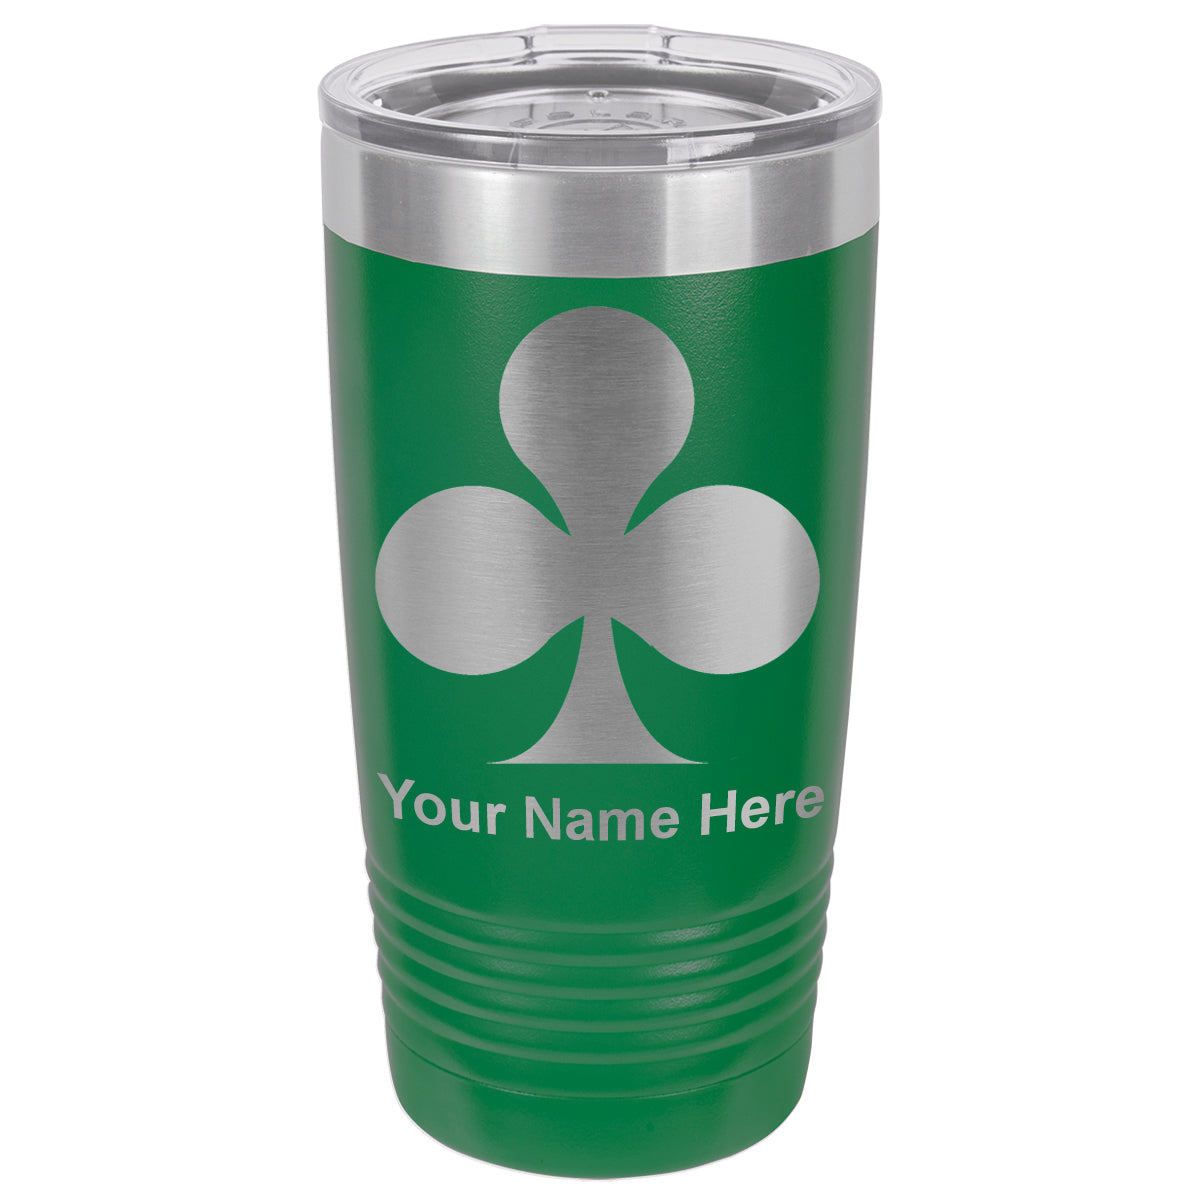 20oz Vacuum Insulated Tumbler Mug, Poker Clubs, Personalized Engraving Included